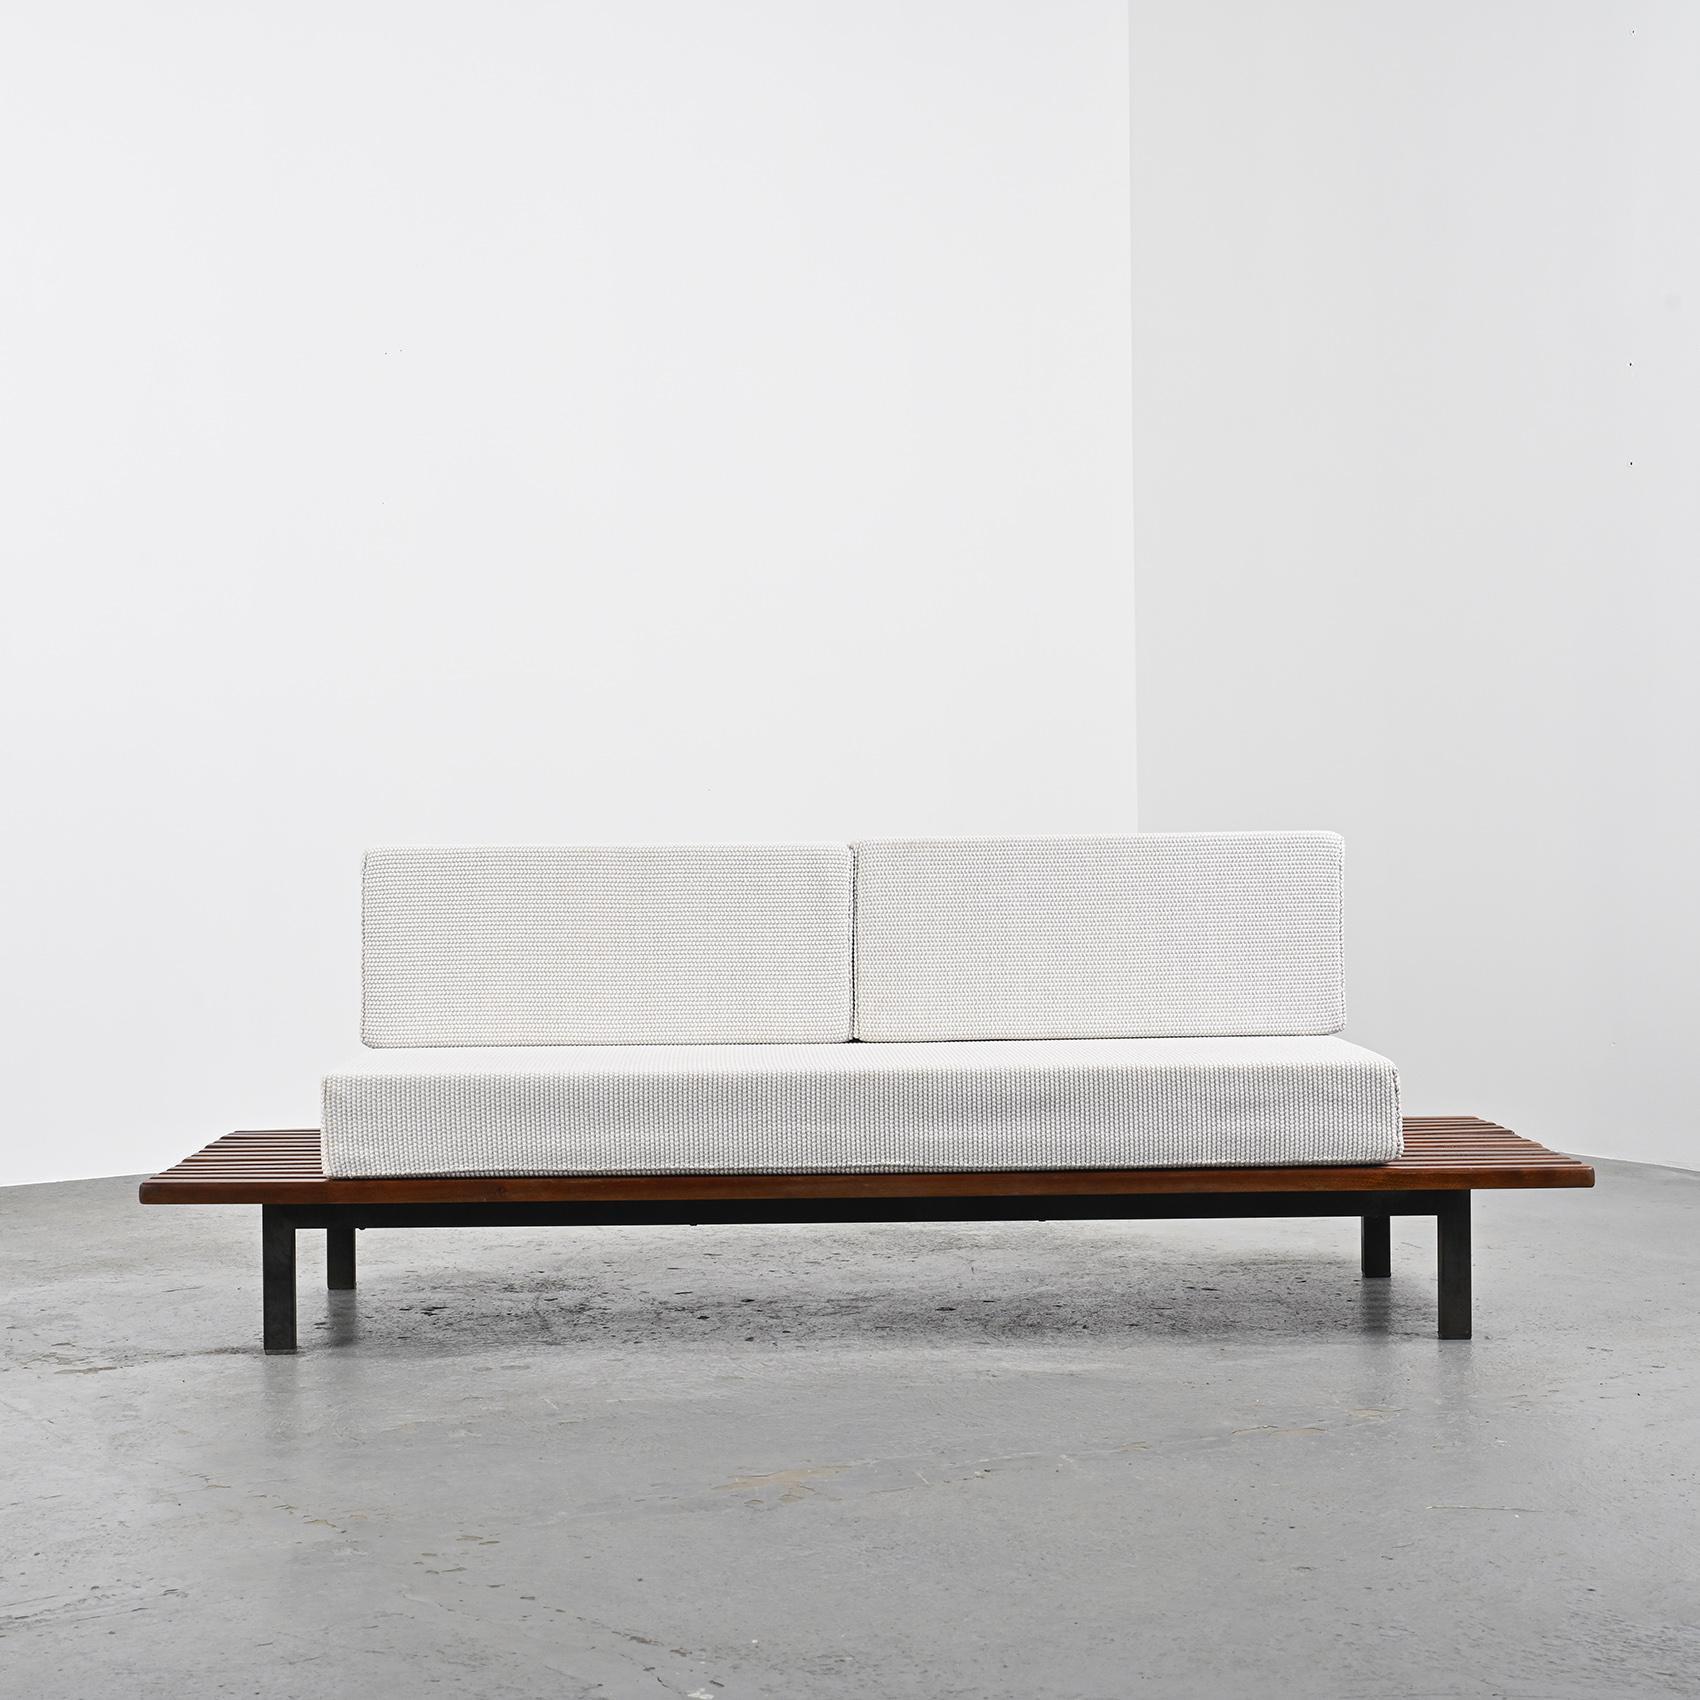 By Charlotte Perriand, a thirteen mahogany slats bench resting on black lacquered metal legs. It can also be stunning as a low table in a living room.

The mattress and cushions have be renovated in pebble stone Nobilis woolen cloth.

Cansado is a